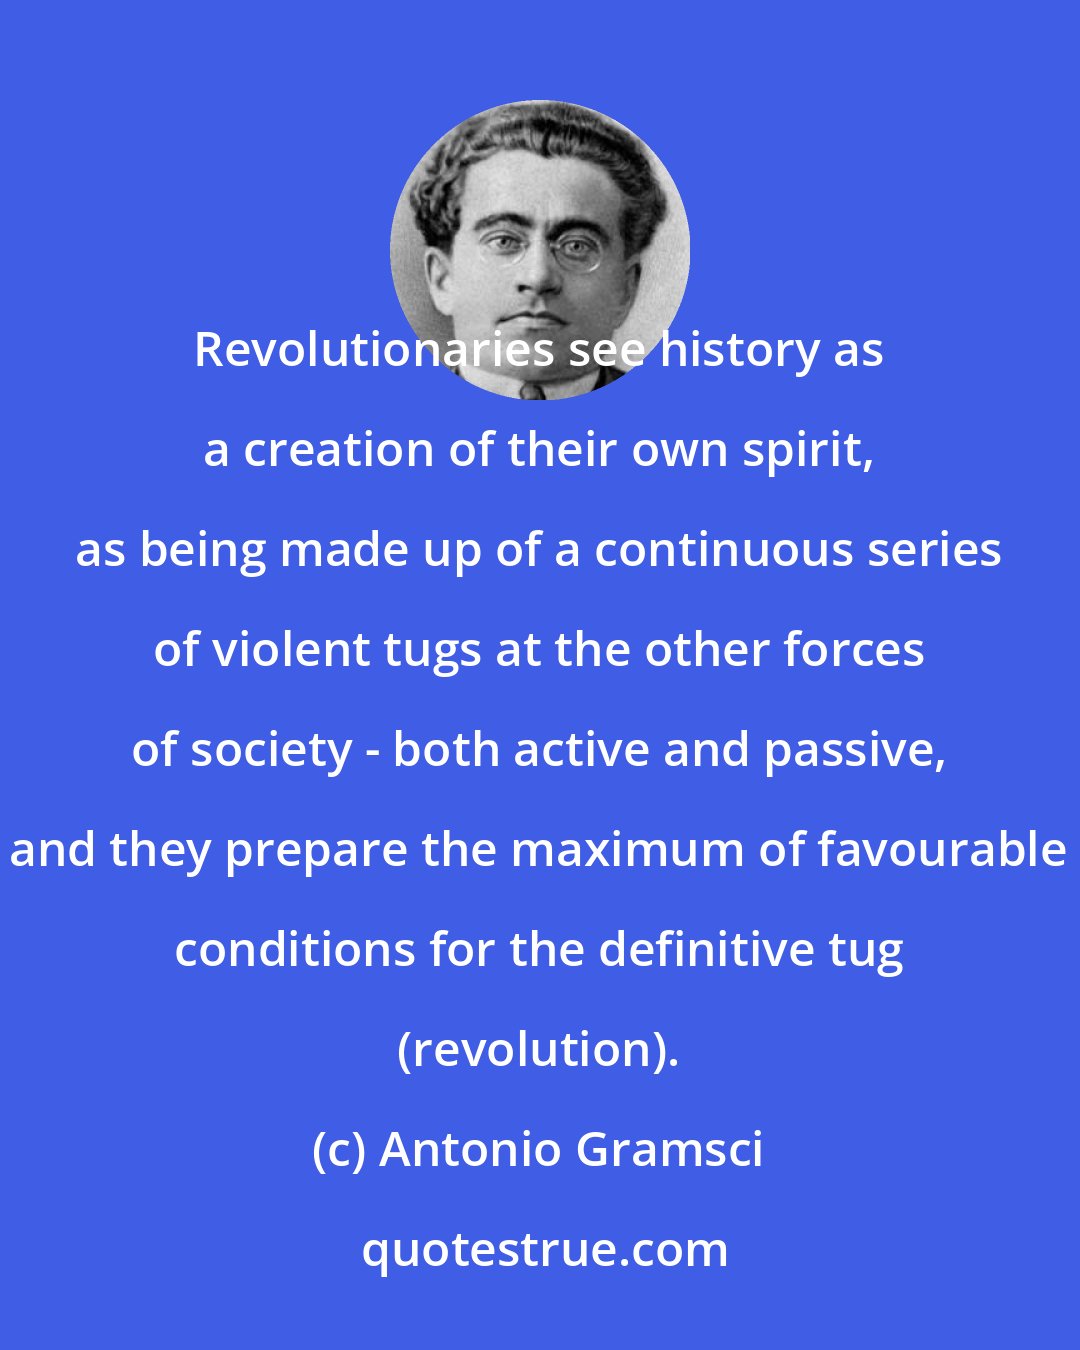 Antonio Gramsci: Revolutionaries see history as a creation of their own spirit, as being made up of a continuous series of violent tugs at the other forces of society - both active and passive, and they prepare the maximum of favourable conditions for the definitive tug (revolution).